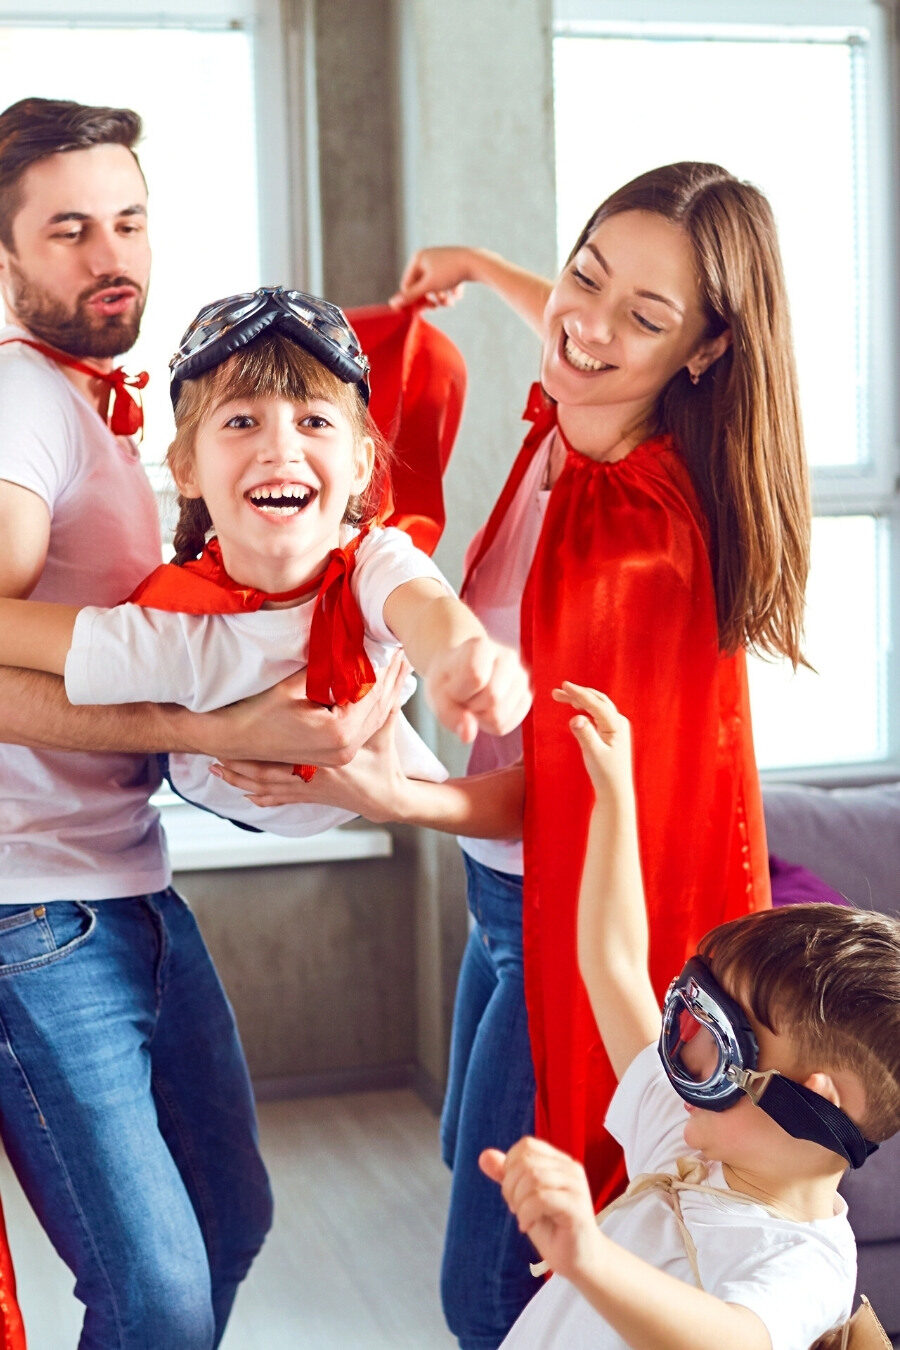 Bring Your Family Closer Together With These 6 Bonding Ideas